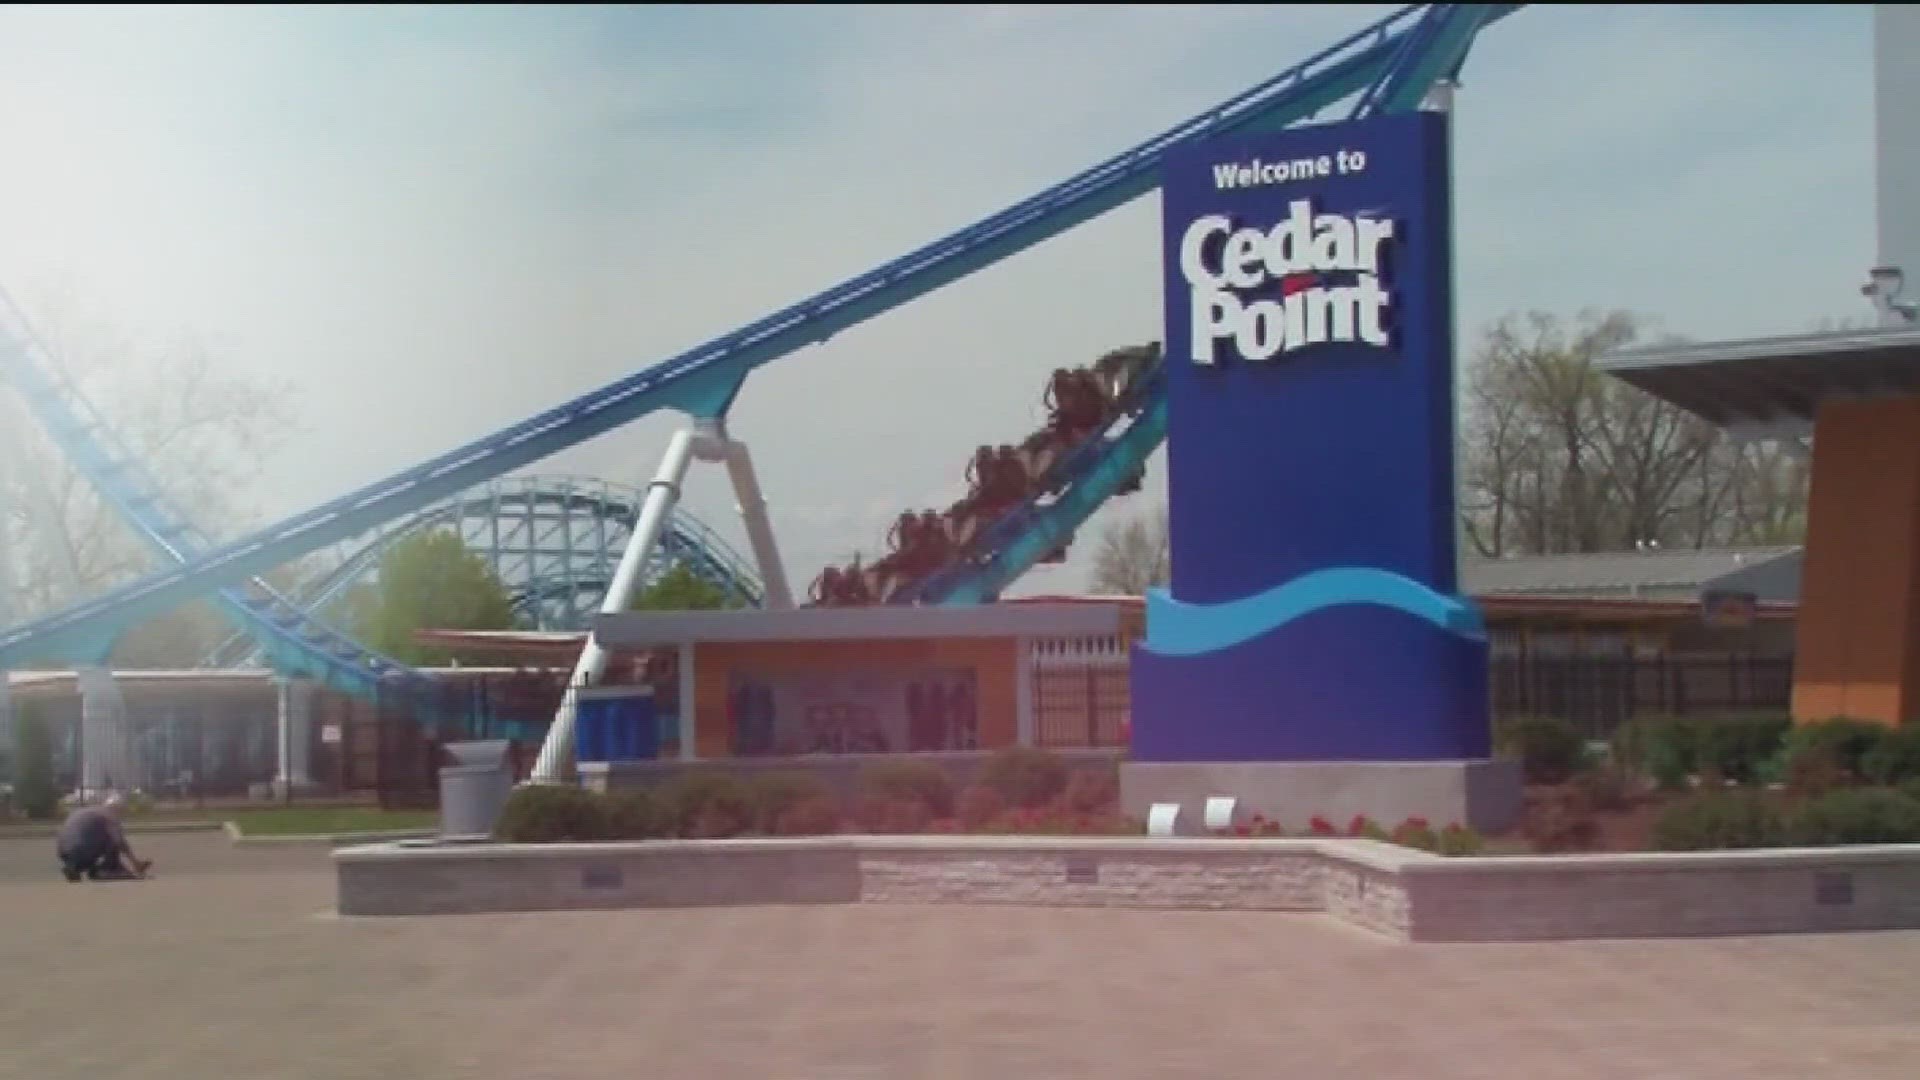 After a 17-month legal fight for public records, WTOL 11 and sister stations WBNS and WKYC prevailed in the Ohio Supreme Court against Cedar Point.